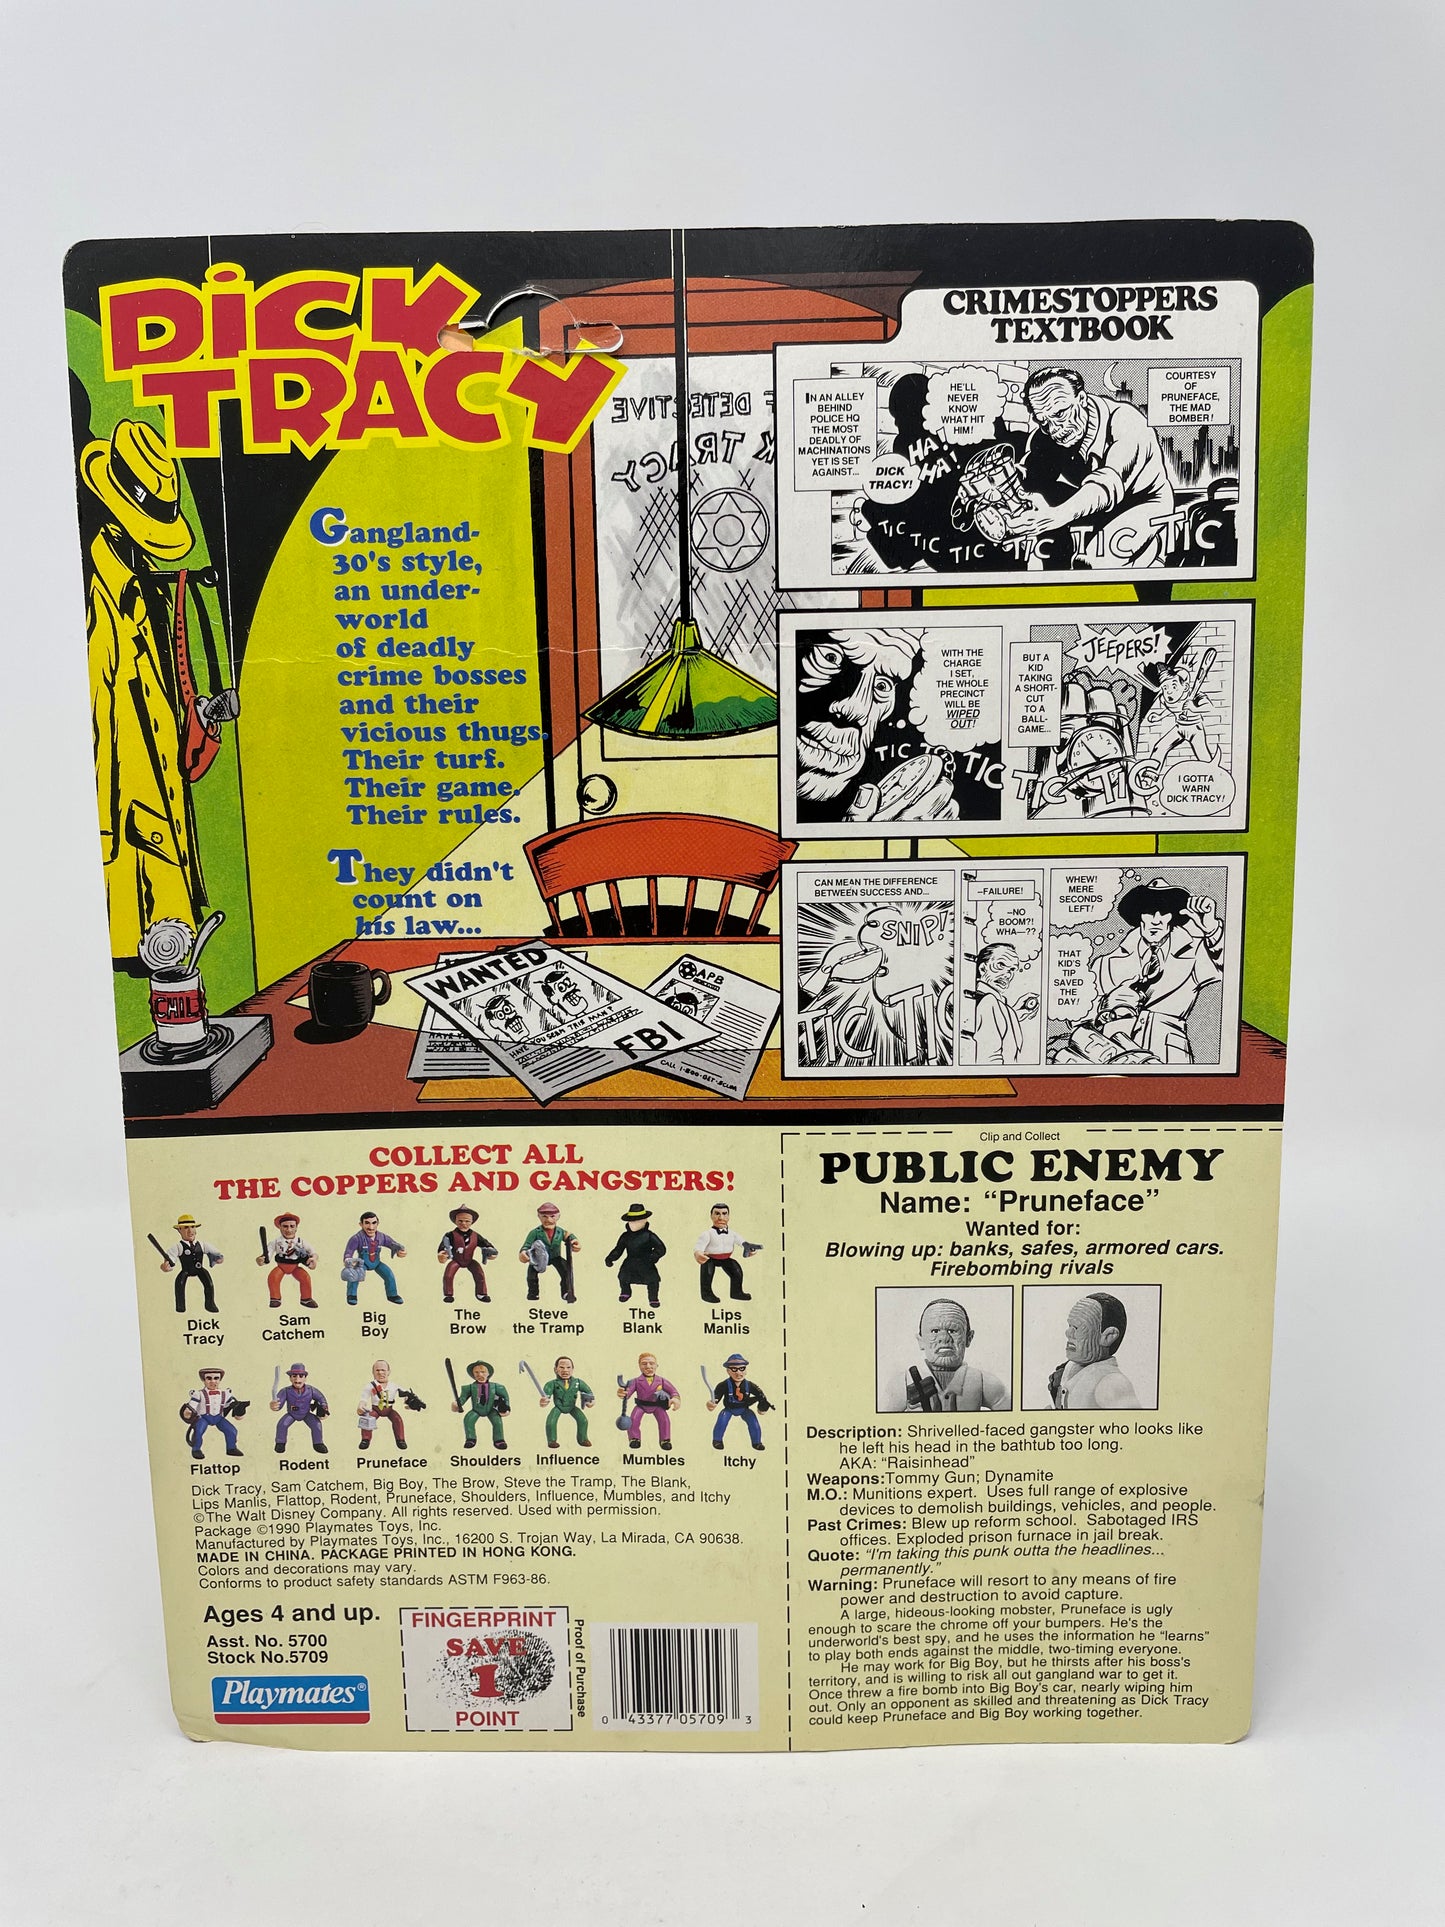 PRUNEFACE FIGURE (1 OF 2) - DICK TRACY - UNPUNCHED - 1990 PLAYMATES